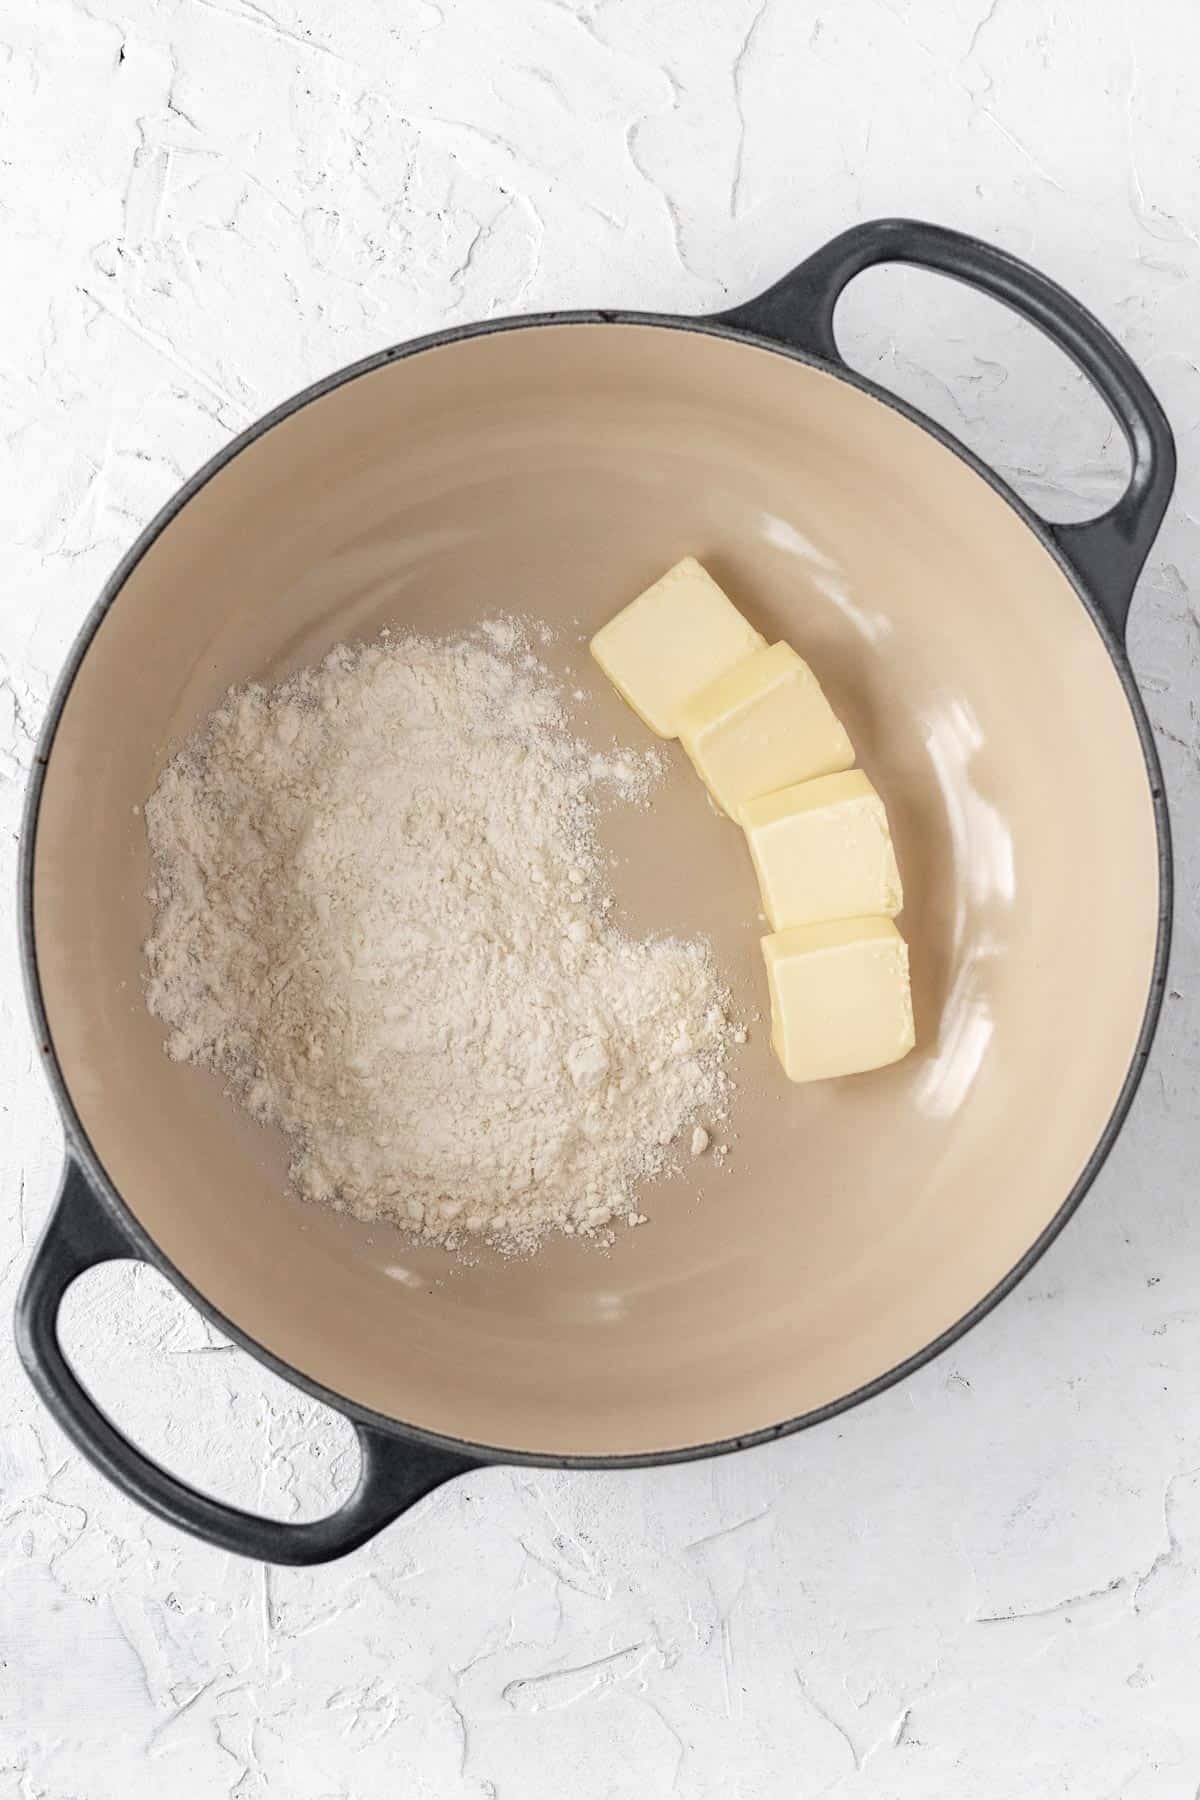 Slices of butter and a scoop of flour in the bottom of a dutch oven.